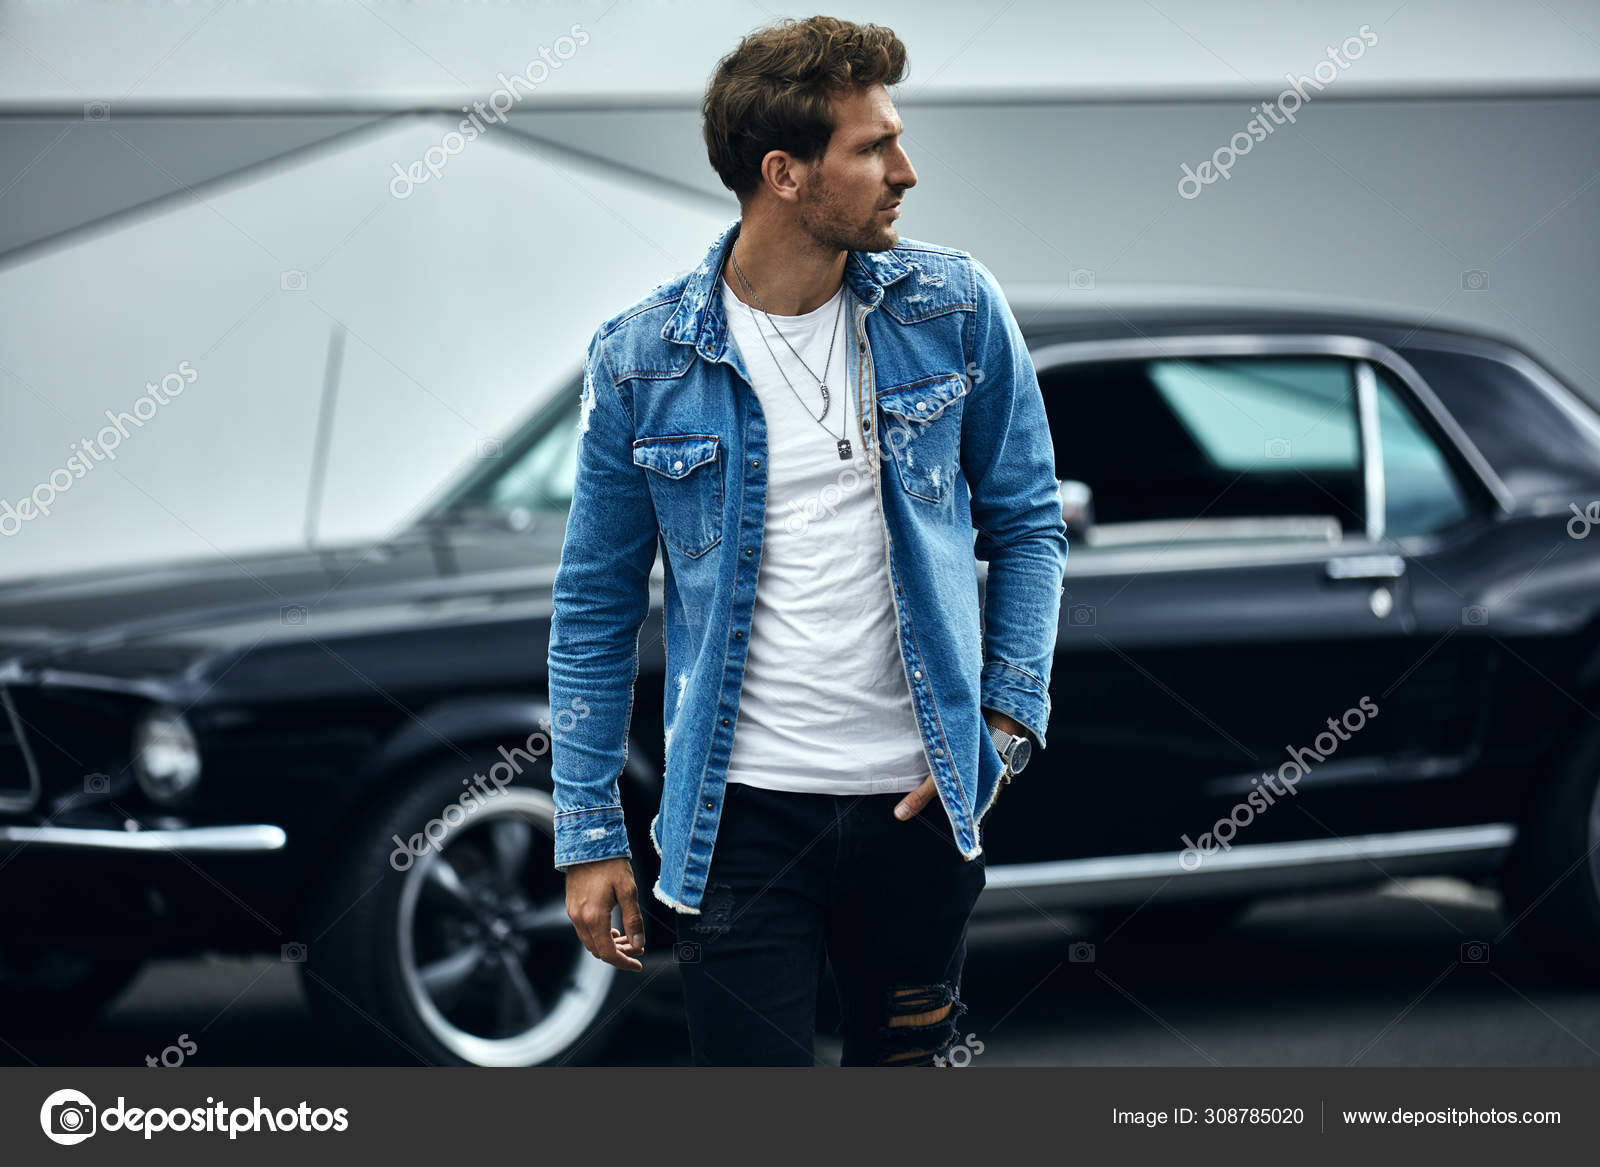 Low Angle View Of Stylish Man In Free Stock Photo and Image 200647092